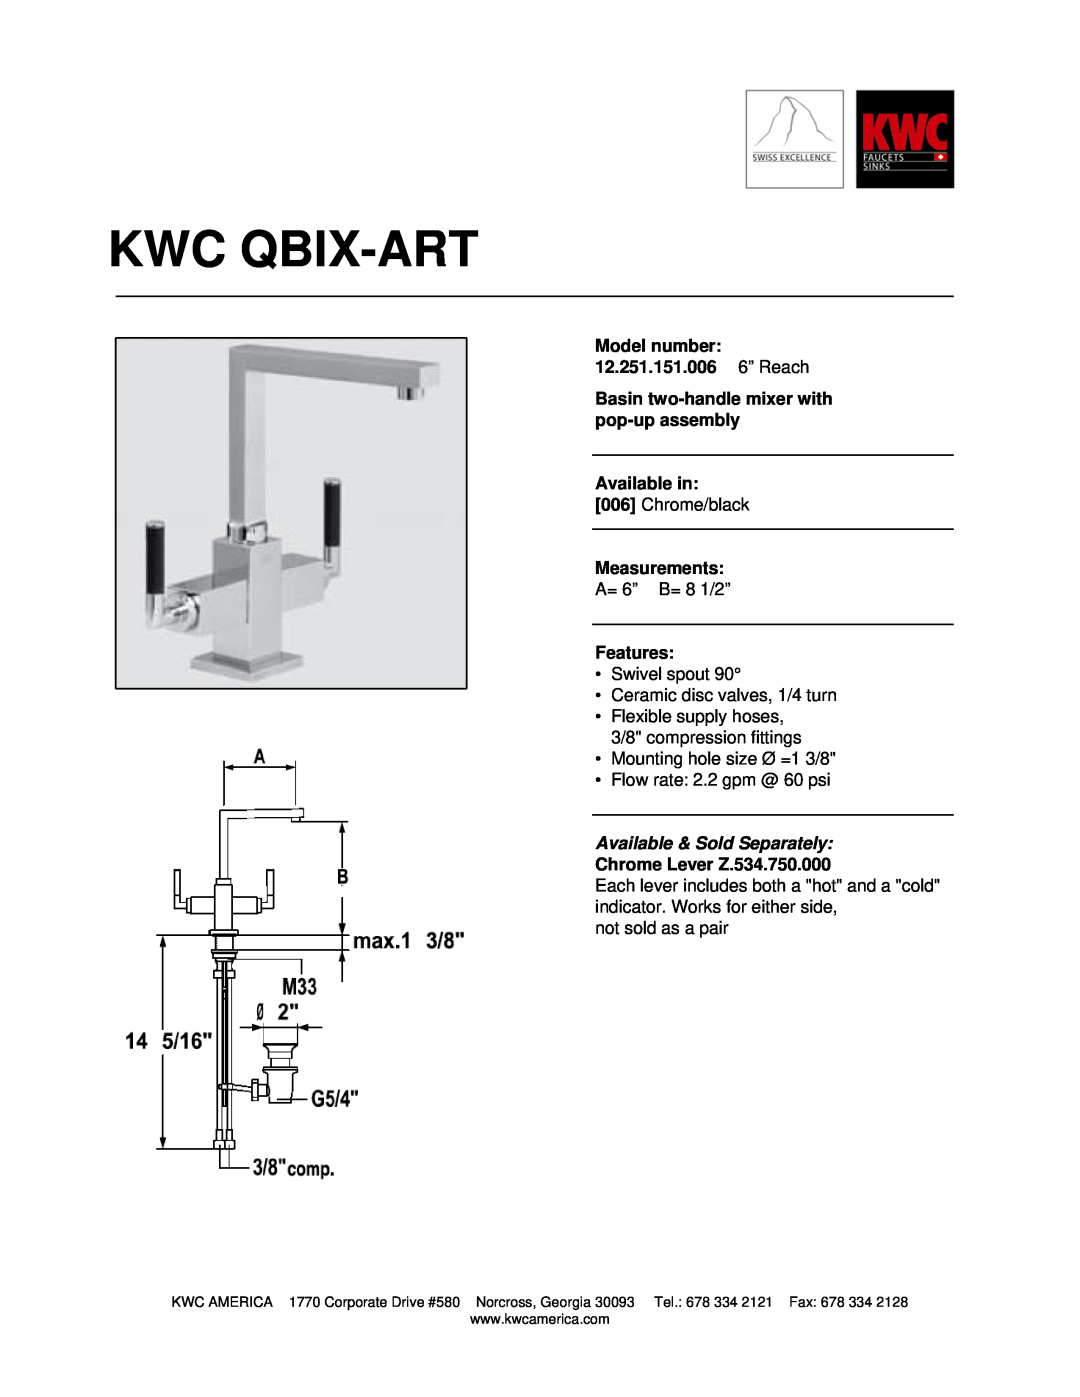 KWC manual Kwc Qbix-Art, Model number 12.251.151.006 6” Reach, Basin two-handlemixer with pop-upassembly, Available in 